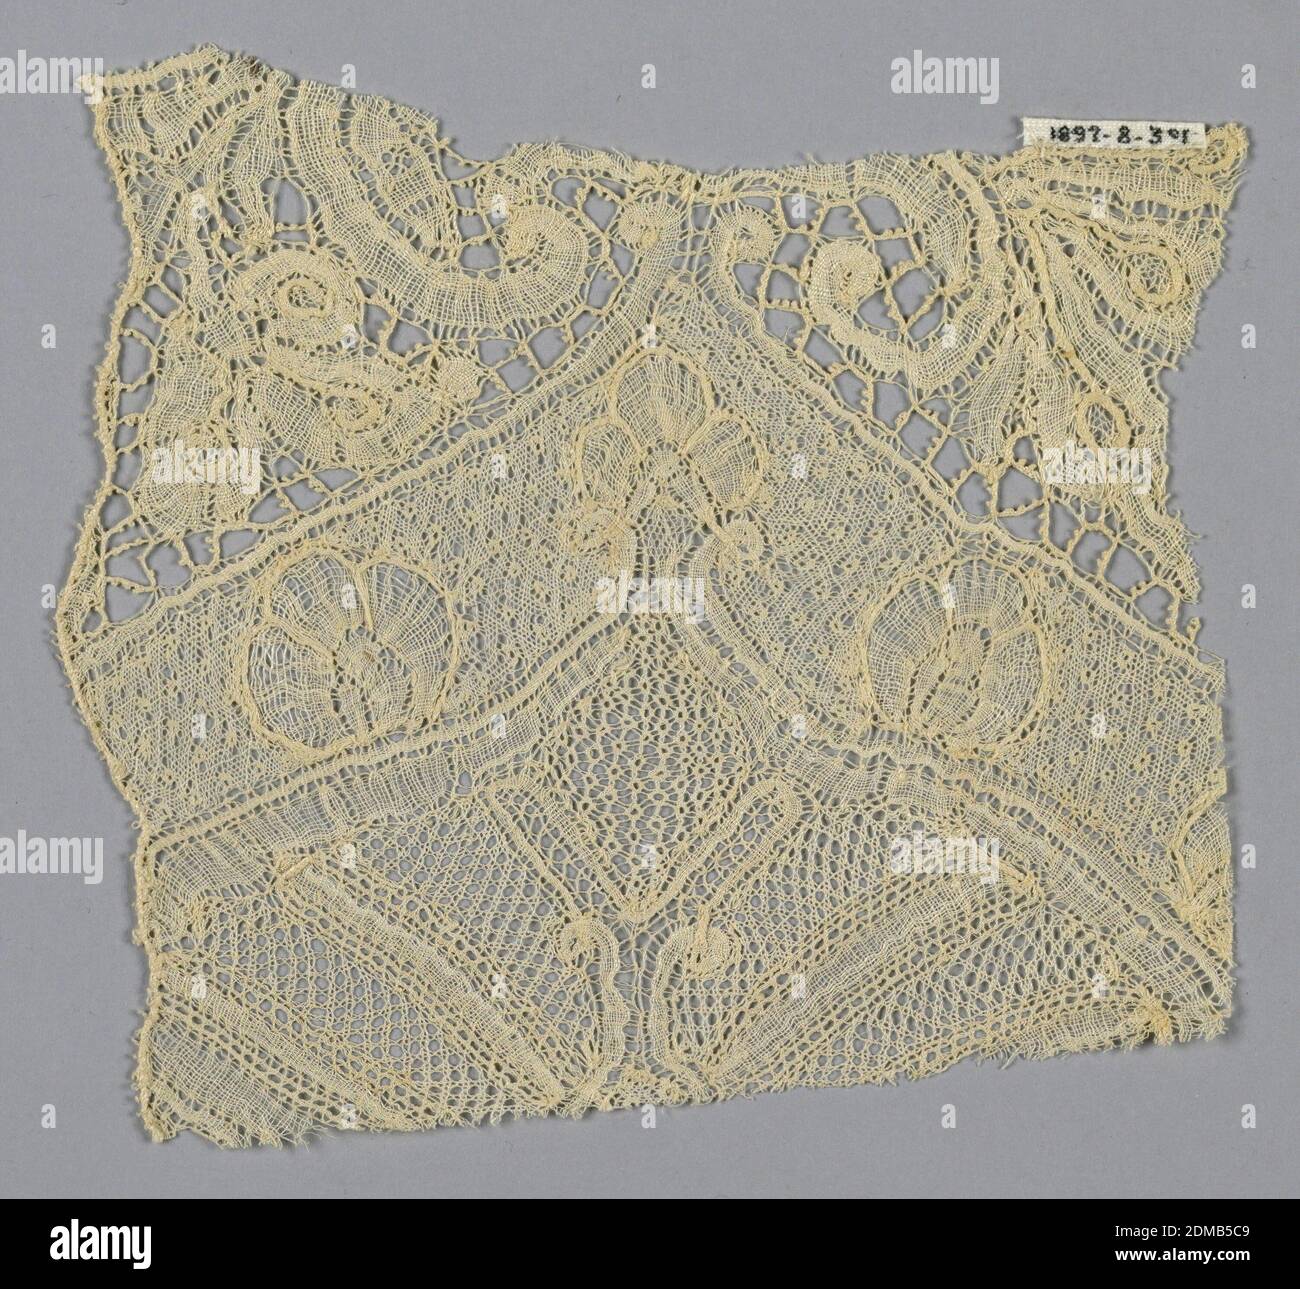 Fragment, Medium: linen Technique: bobbin lace (Brussels-style), Fragment has an incomplete large-scale floral design with varied patterns of ground mesh., Belgium, 18th century, lace, Fragment Stock Photo